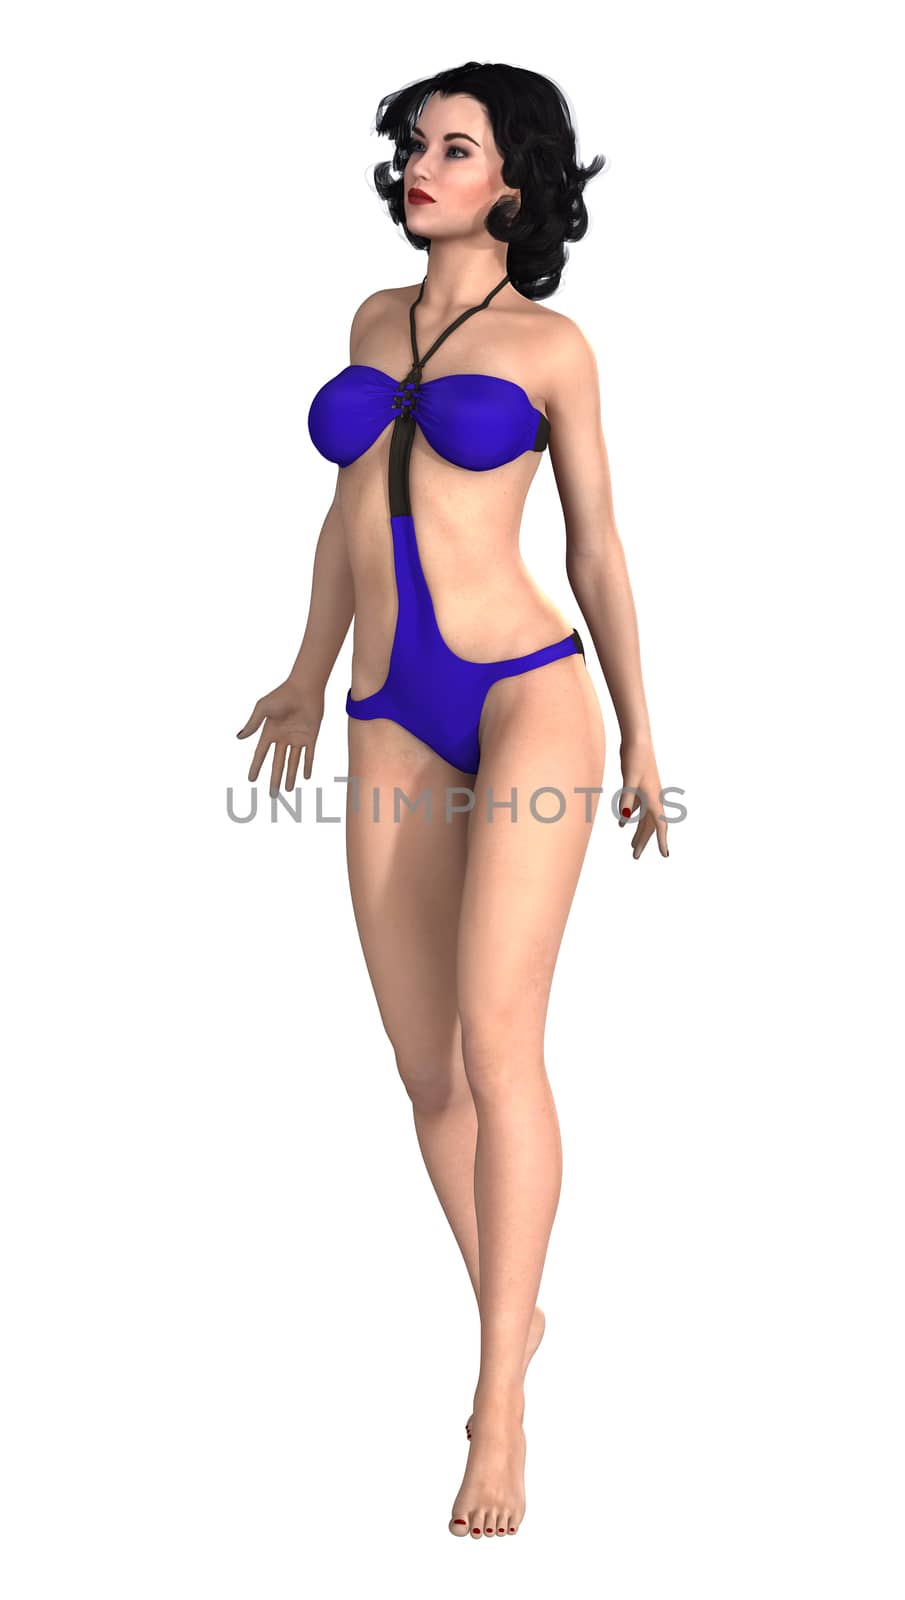 3D digital render of a beautiful pin up girl isolated on white background